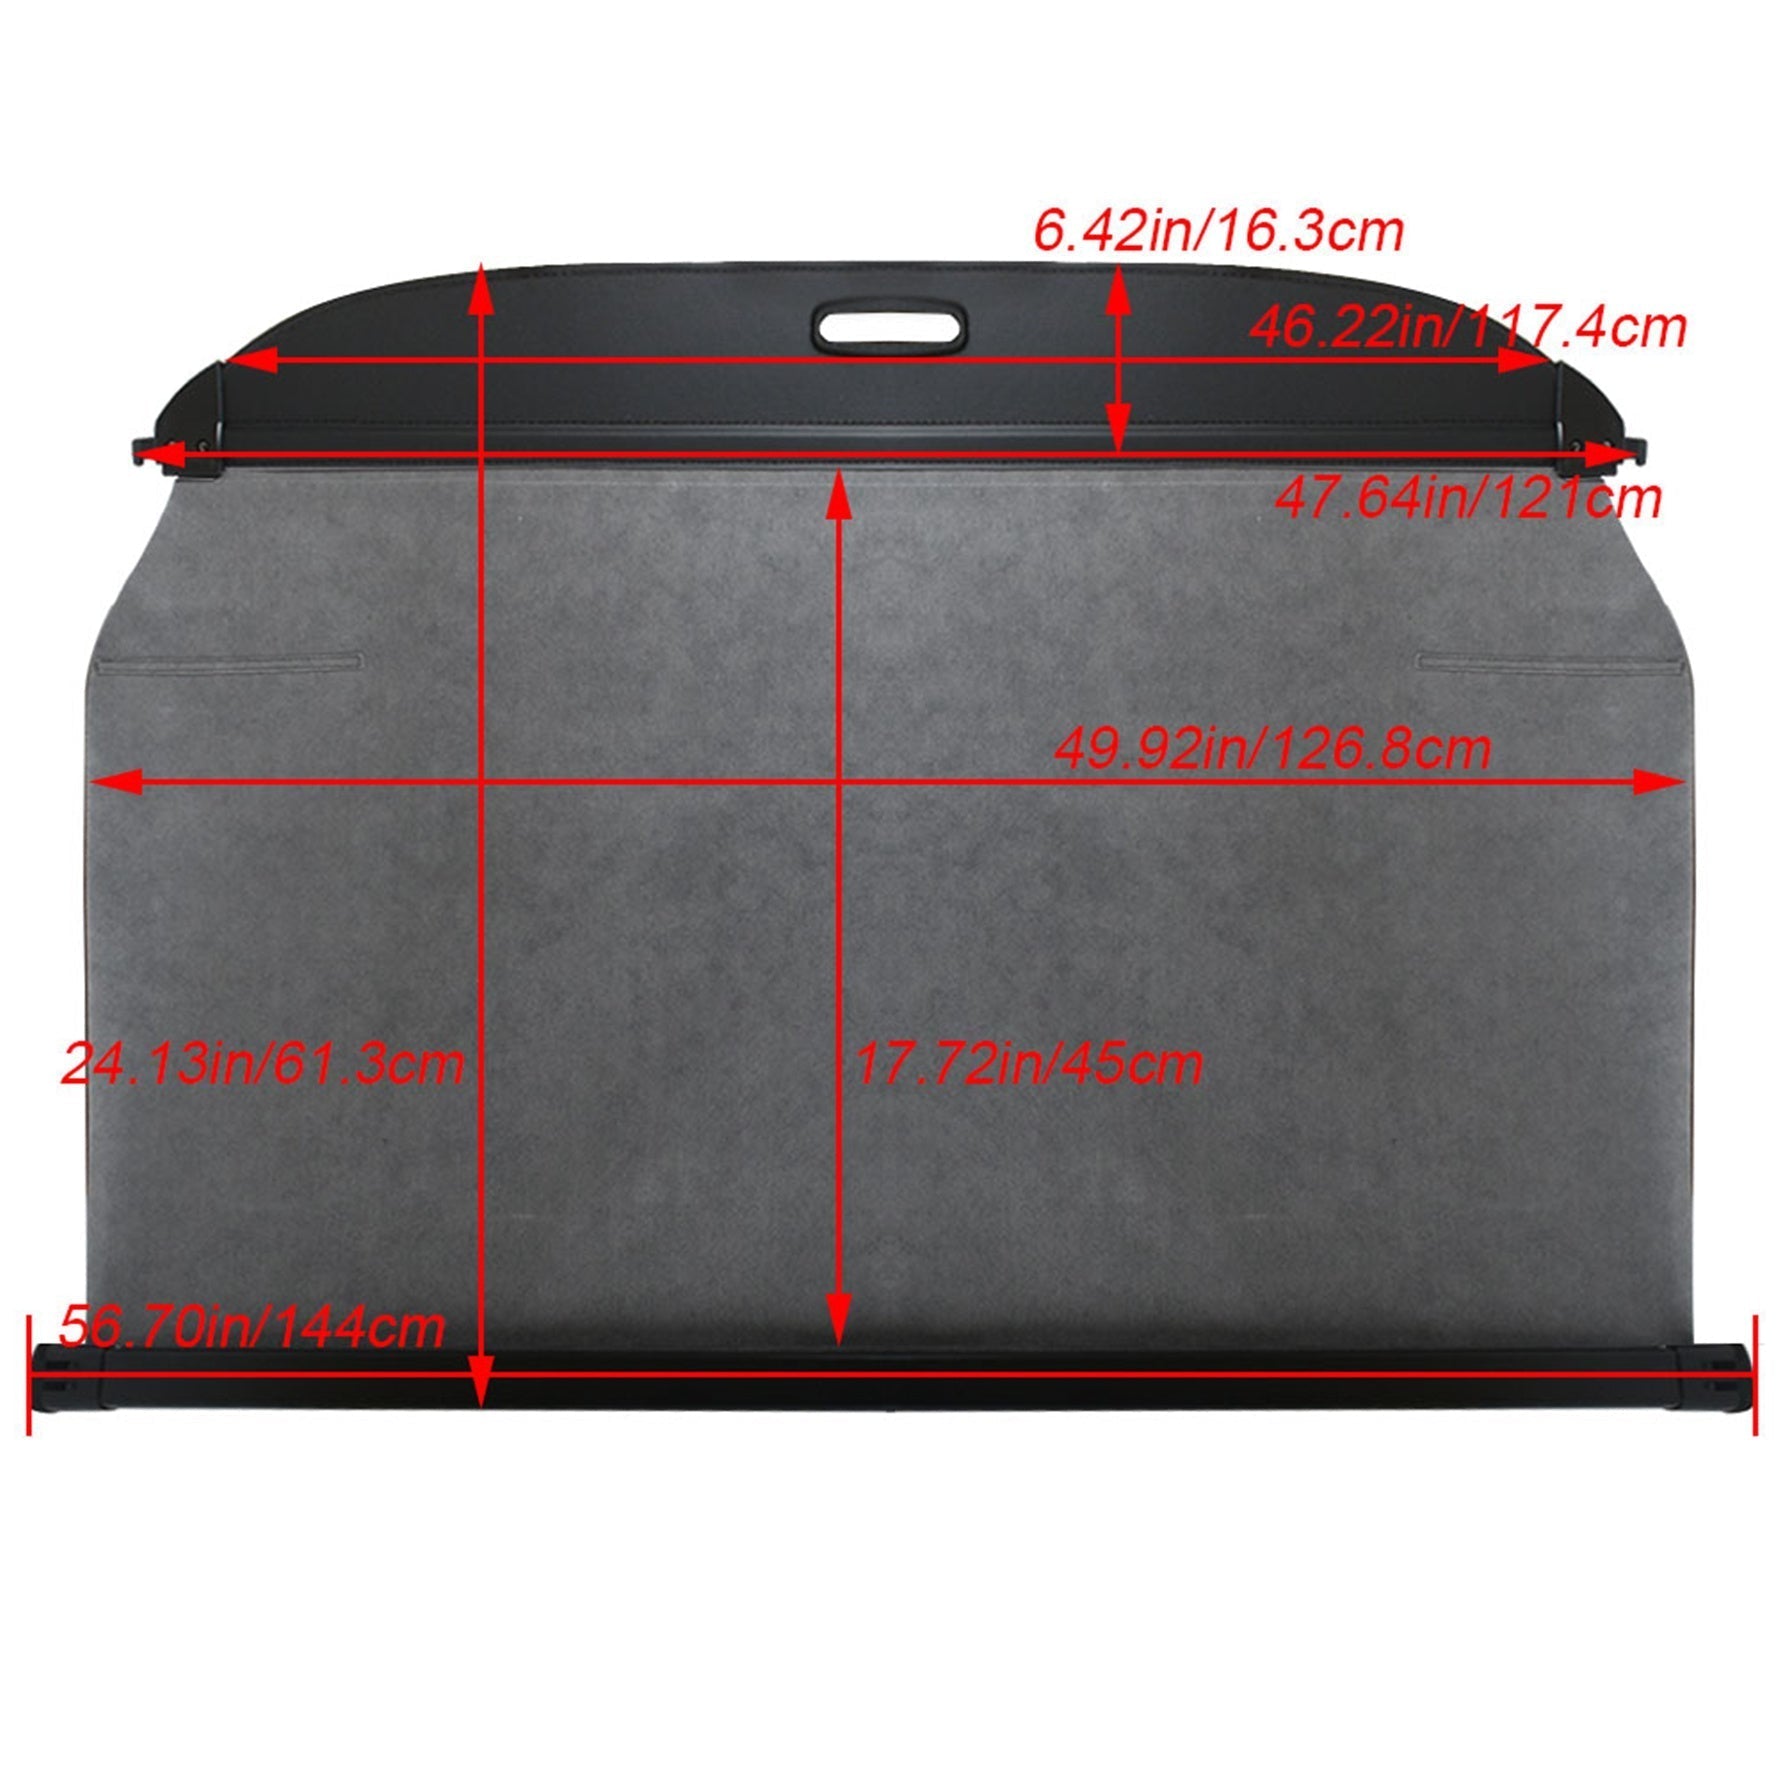 Fit For Kia Sorento 2016-2019 Trunk Cargo Luggage Security Shade Cover Shield